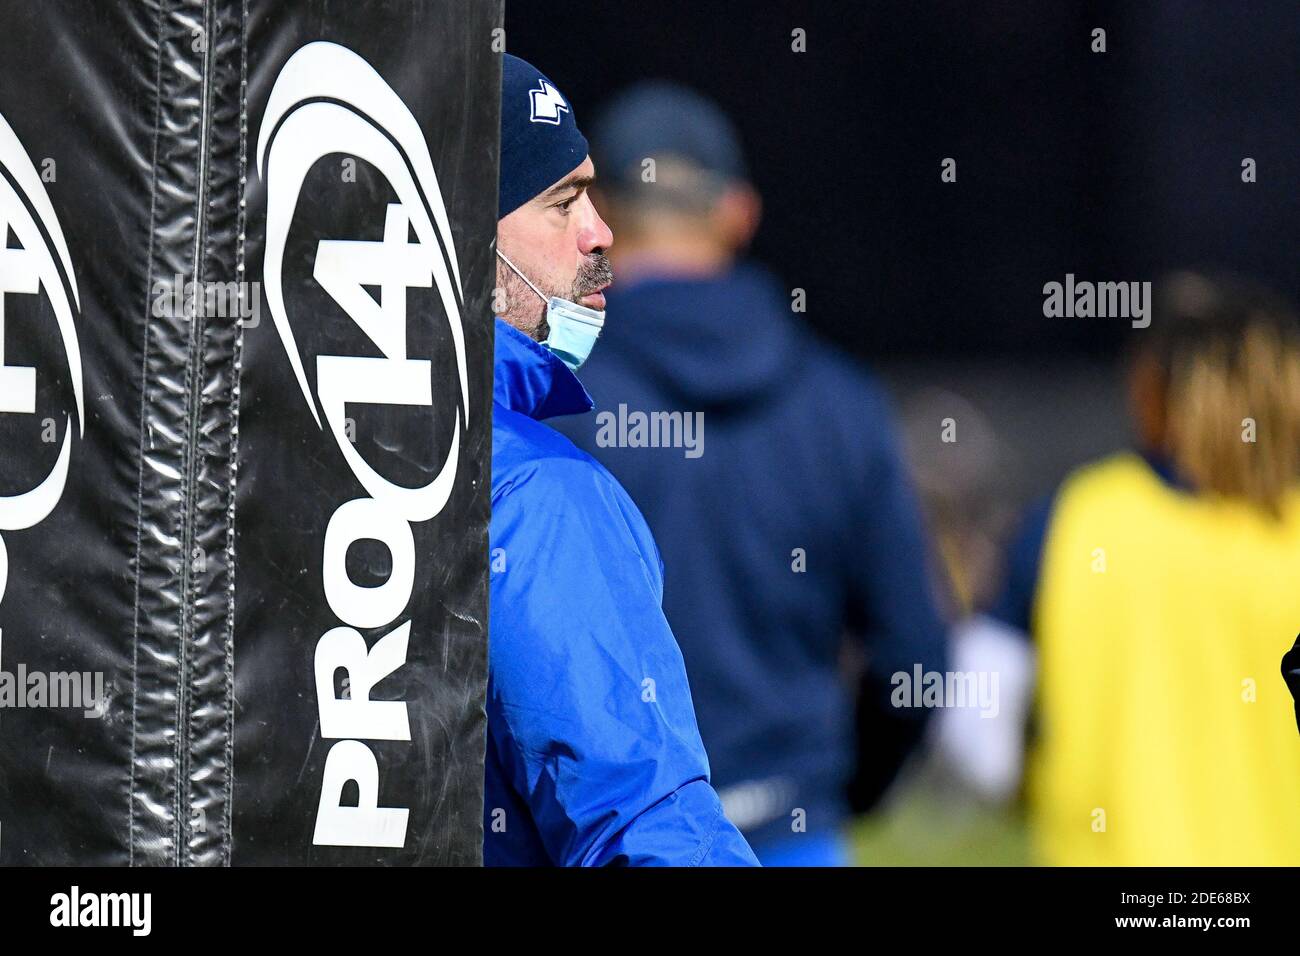 Monigo stadium, Treviso, Italy, 29 Nov 2020, Fabio Ongaro (Forward Coach of Benetton Rugby) during Benetton Treviso vs Dragons Rugby, Rugby Guinness Pro 14 match - Photo Ettore Griffoni / LM Stock Photo